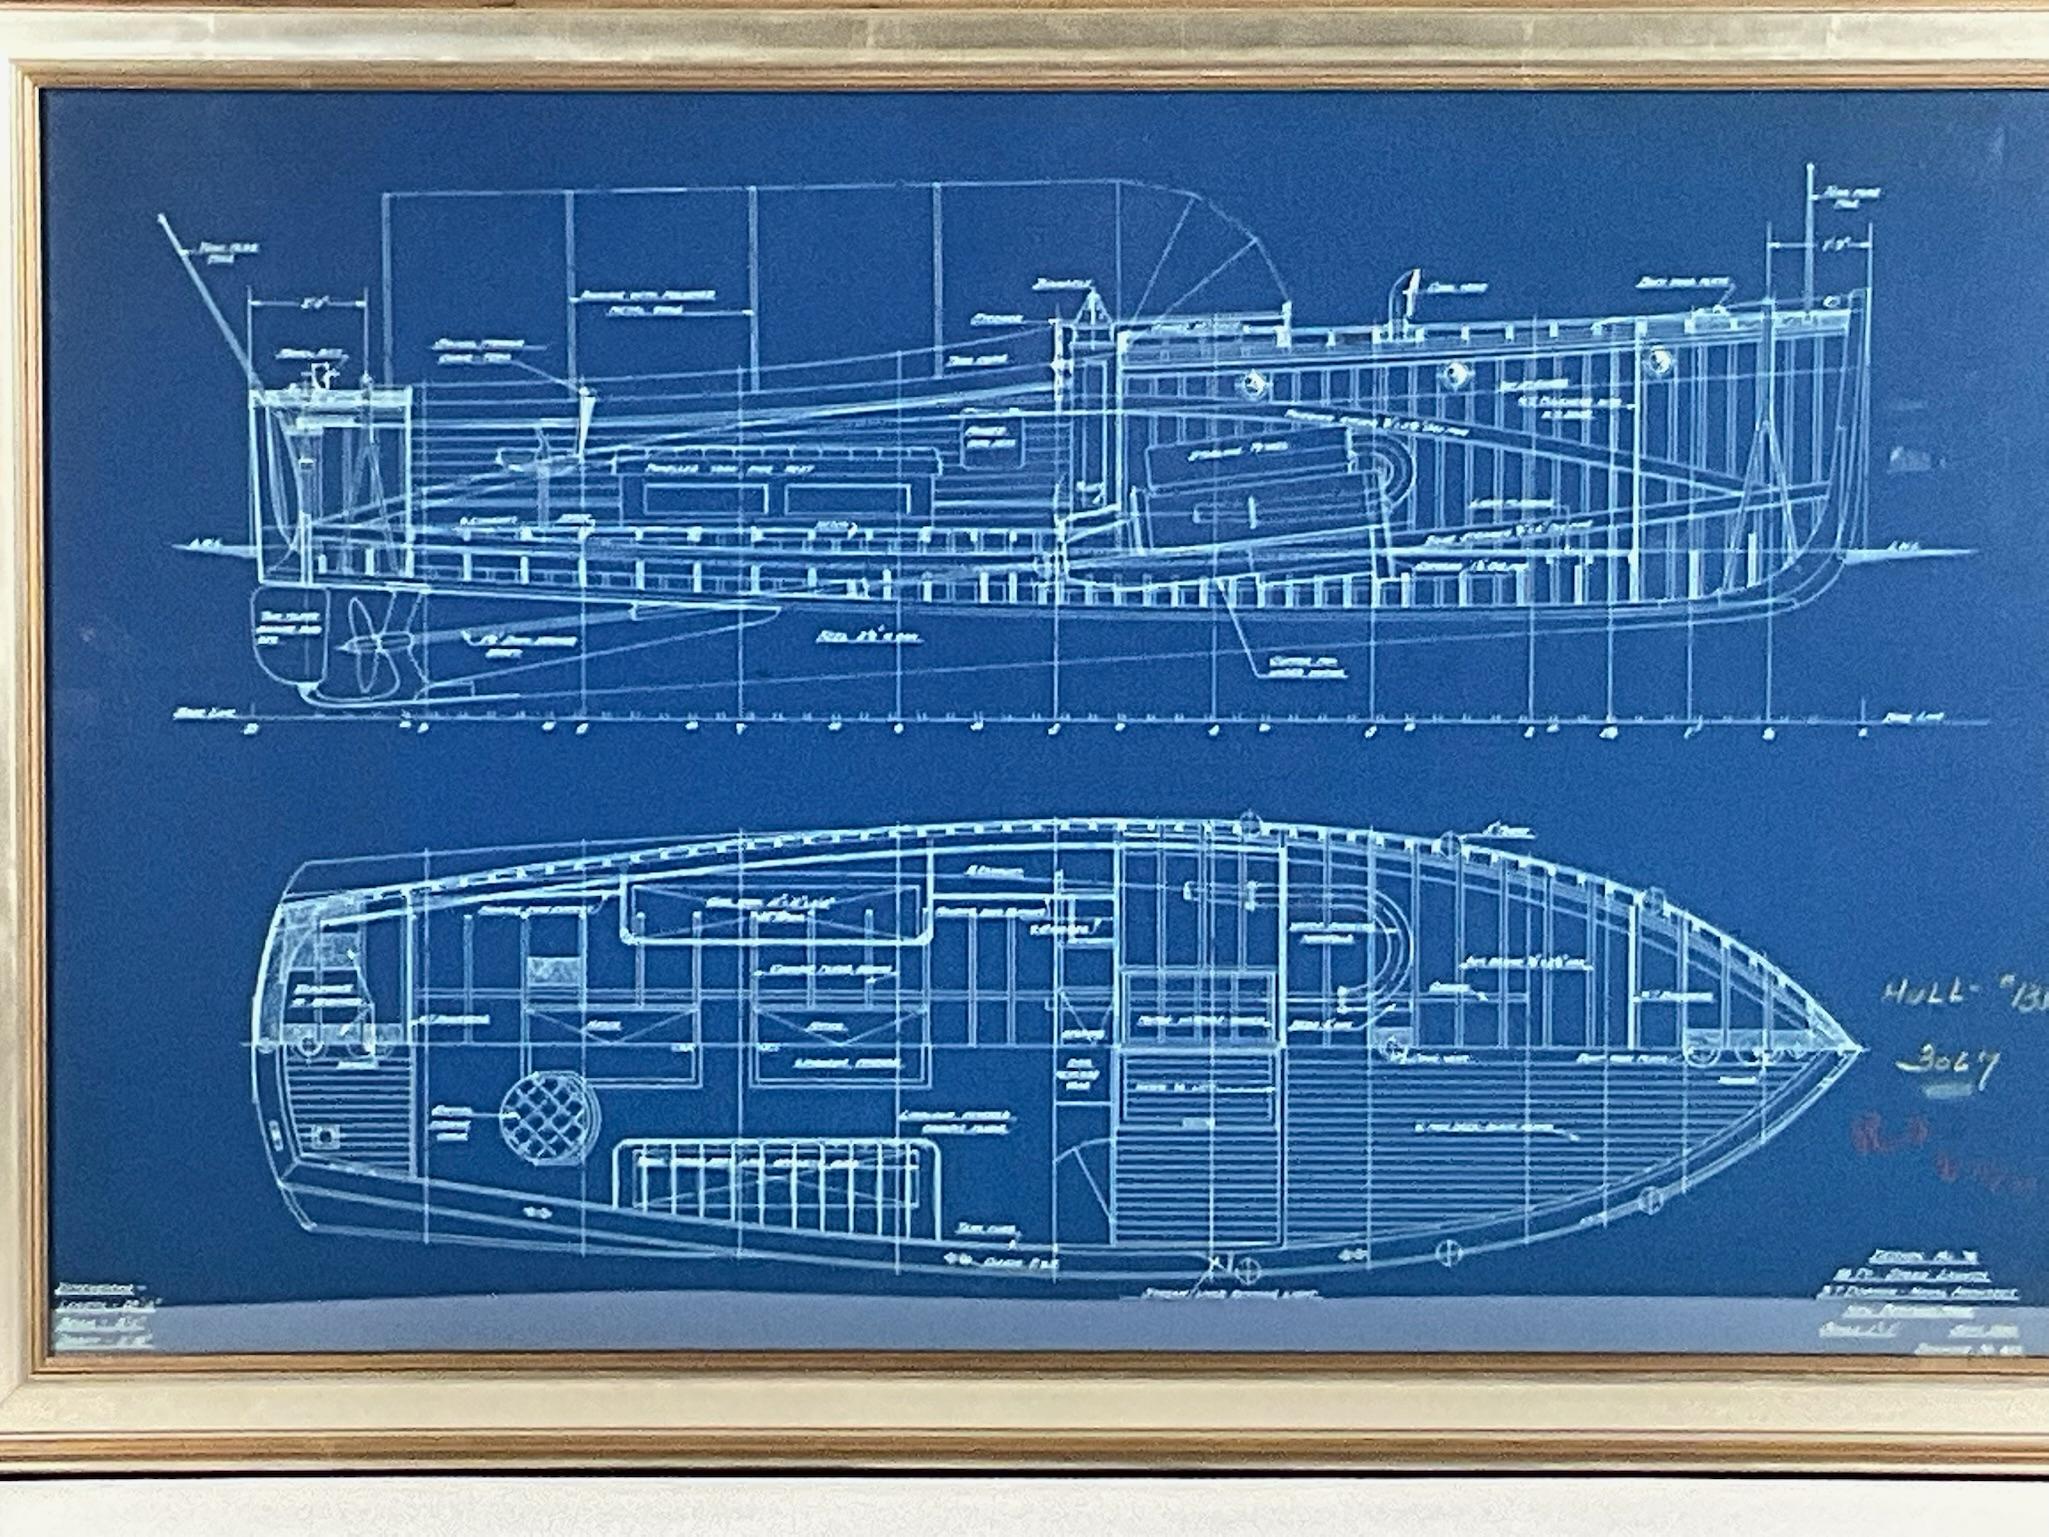 North American Yacht Blueprint of a Launch by B.T. Dobson Naval Architect. For Sale